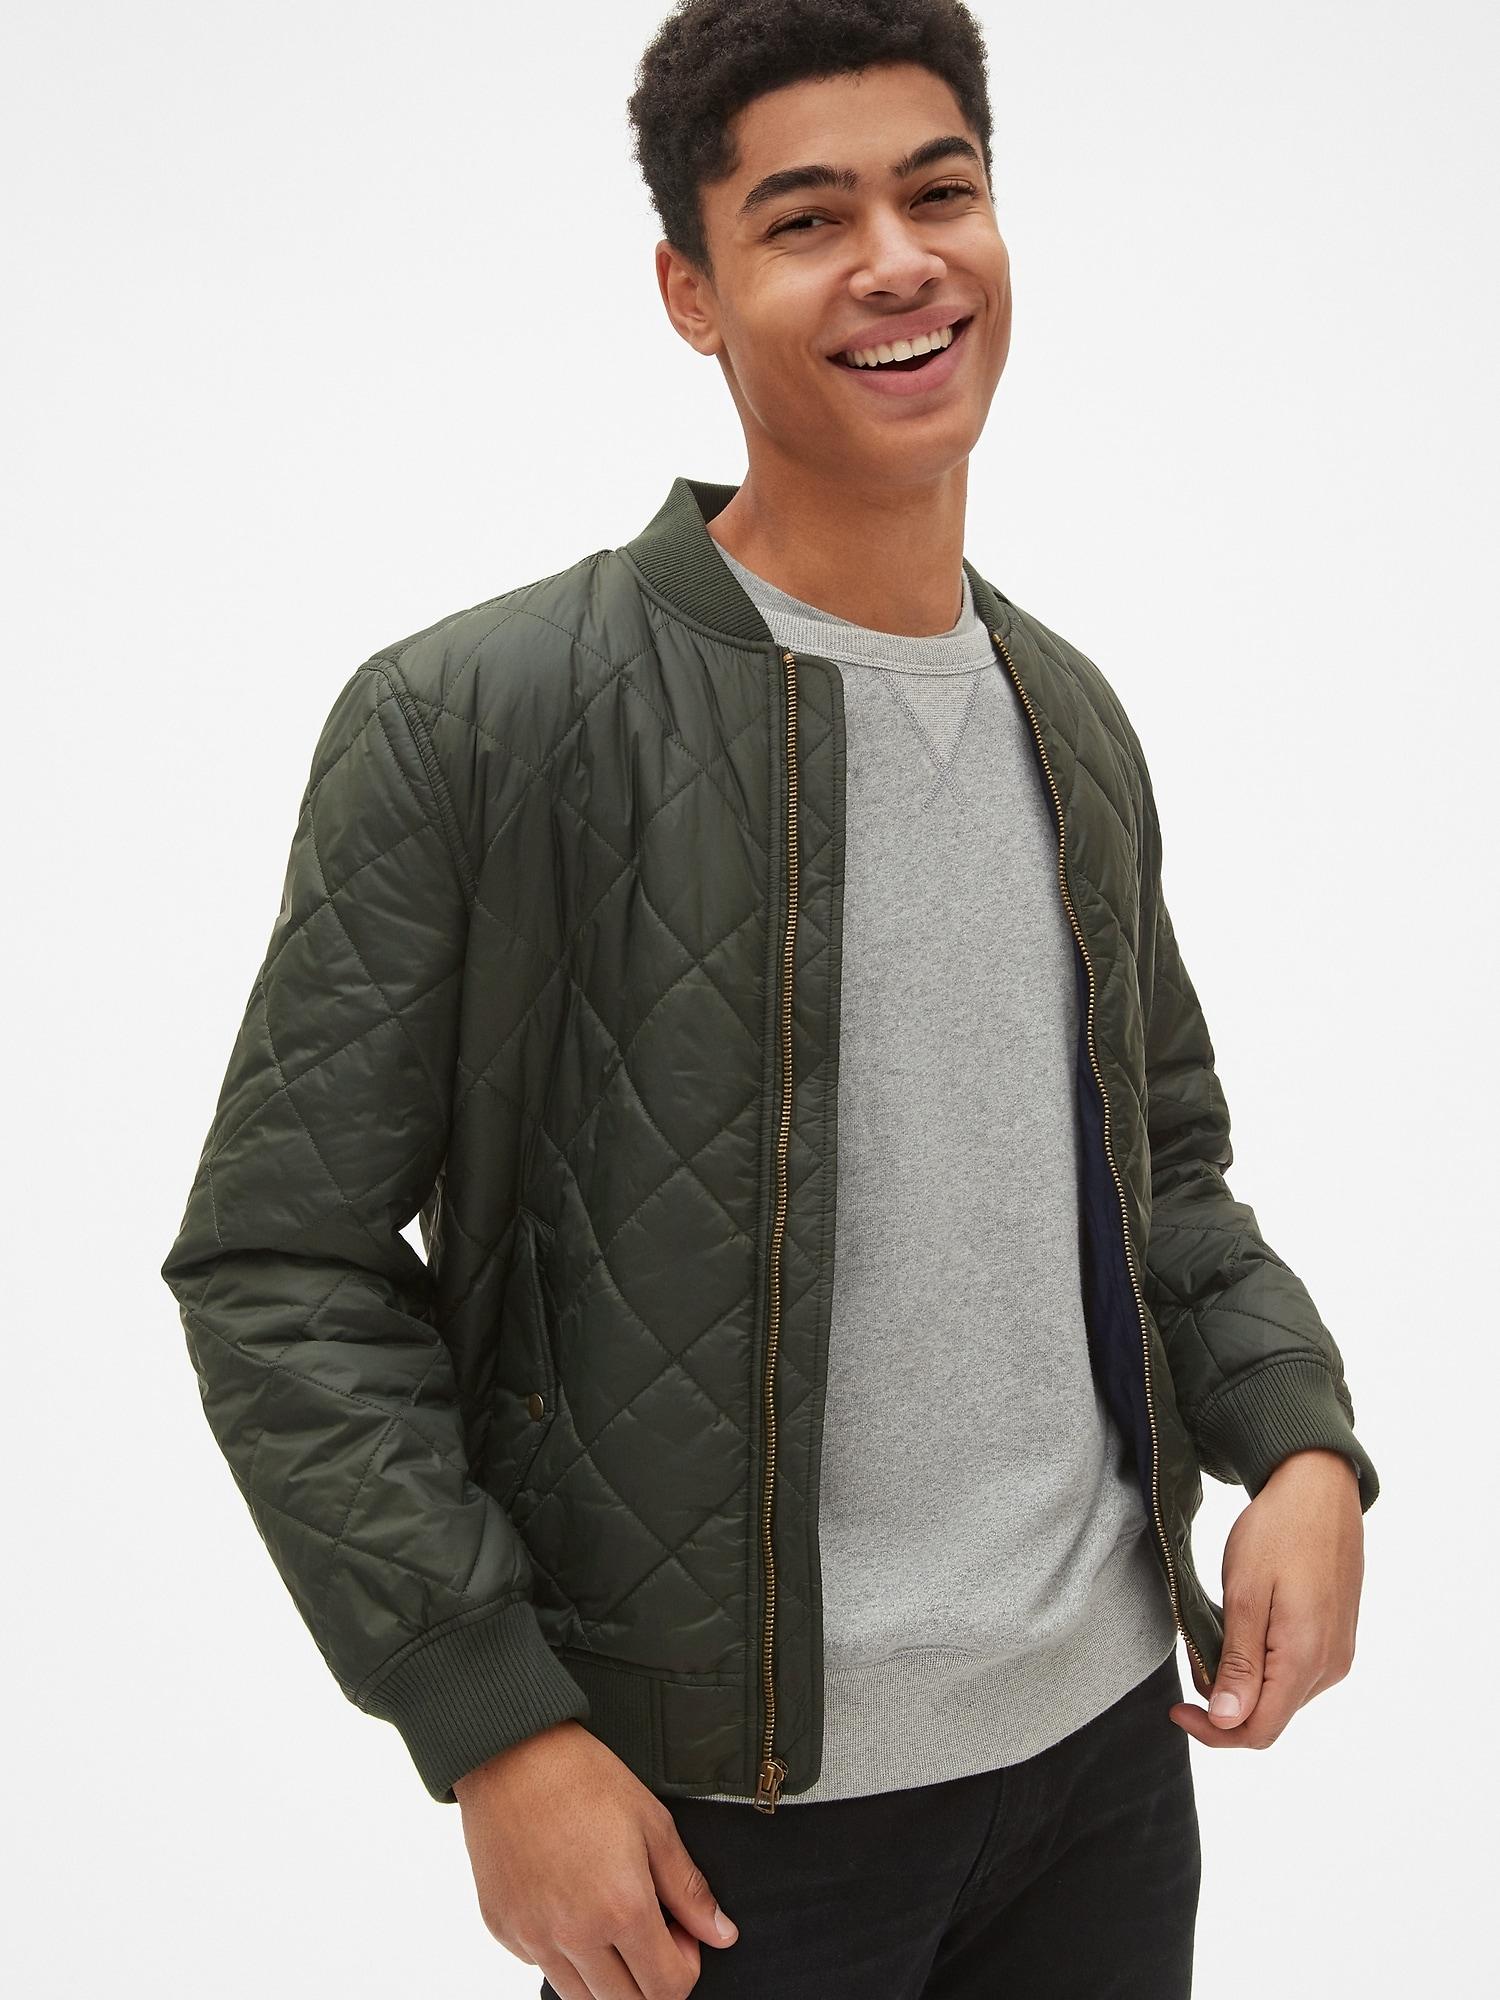 gap quilted bomber jacket